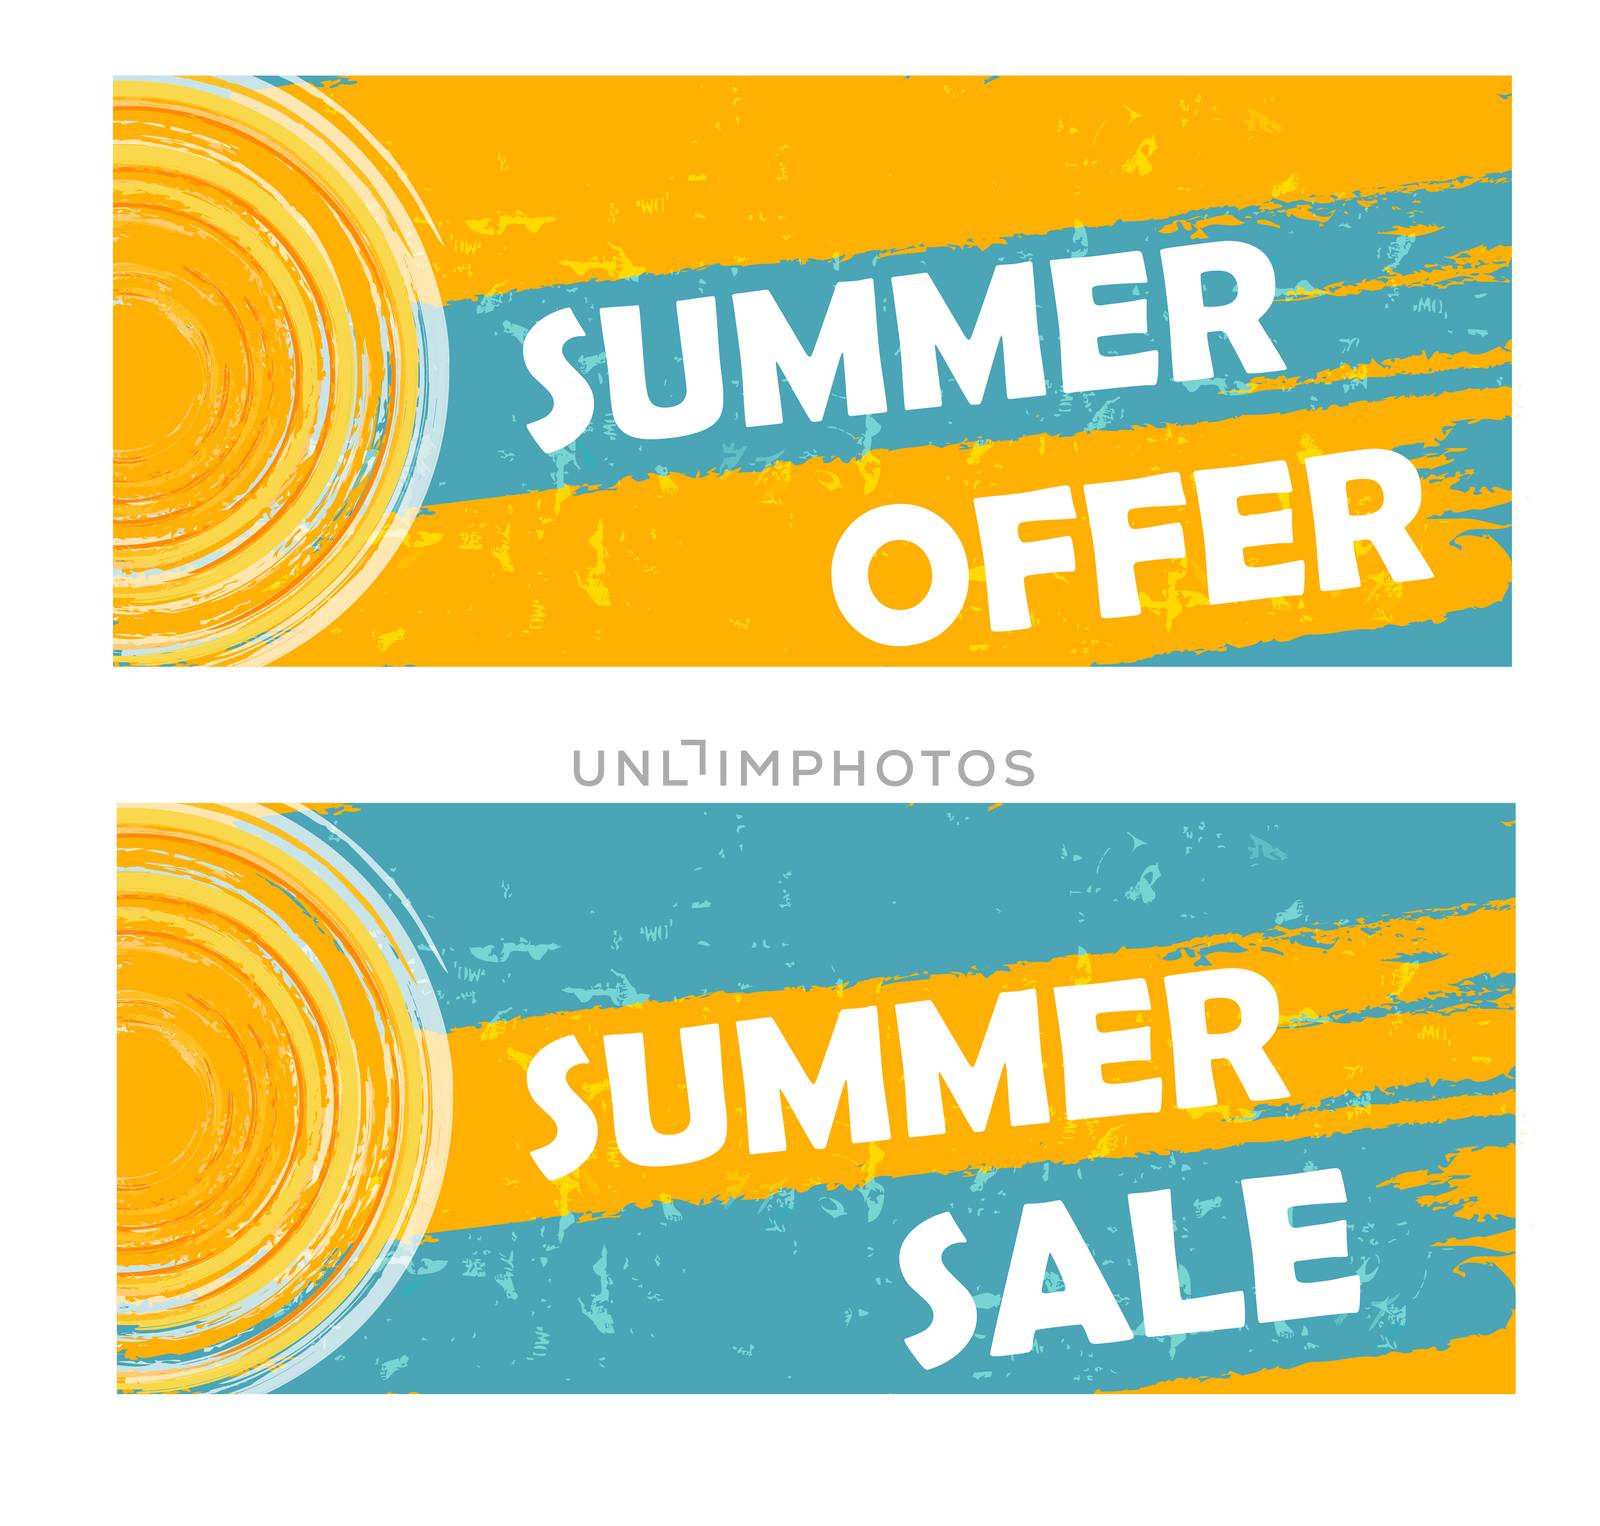 summer offer and sale with sun sign, drawn banners by marinini